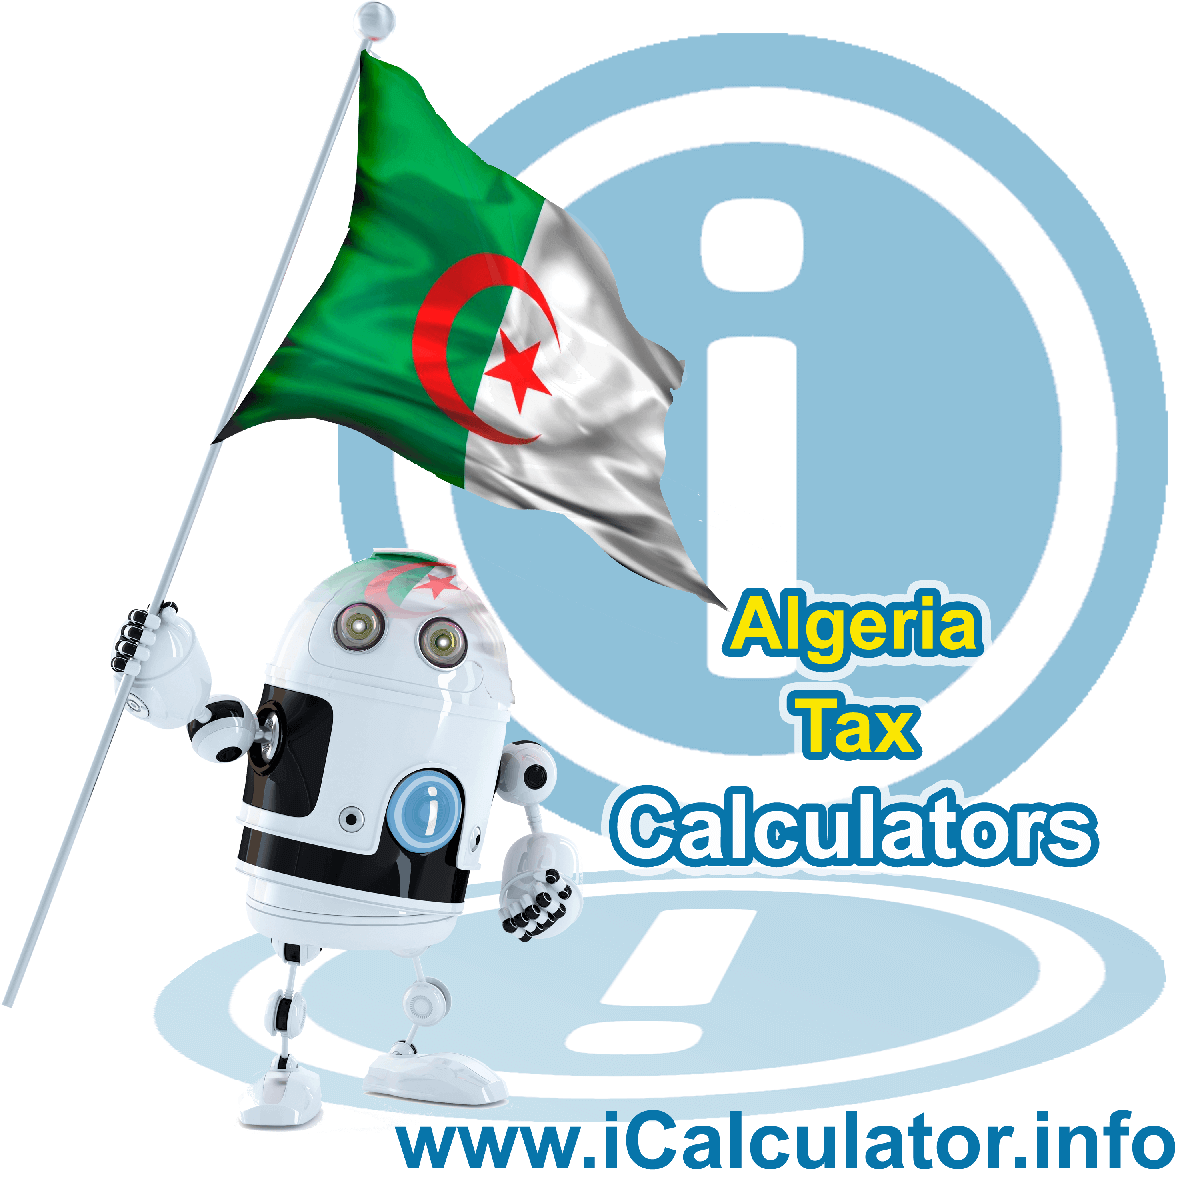 Algeria Wage Calculator. This image shows the Algeria flag and information relating to the tax formula for the Algeria Tax Calculator